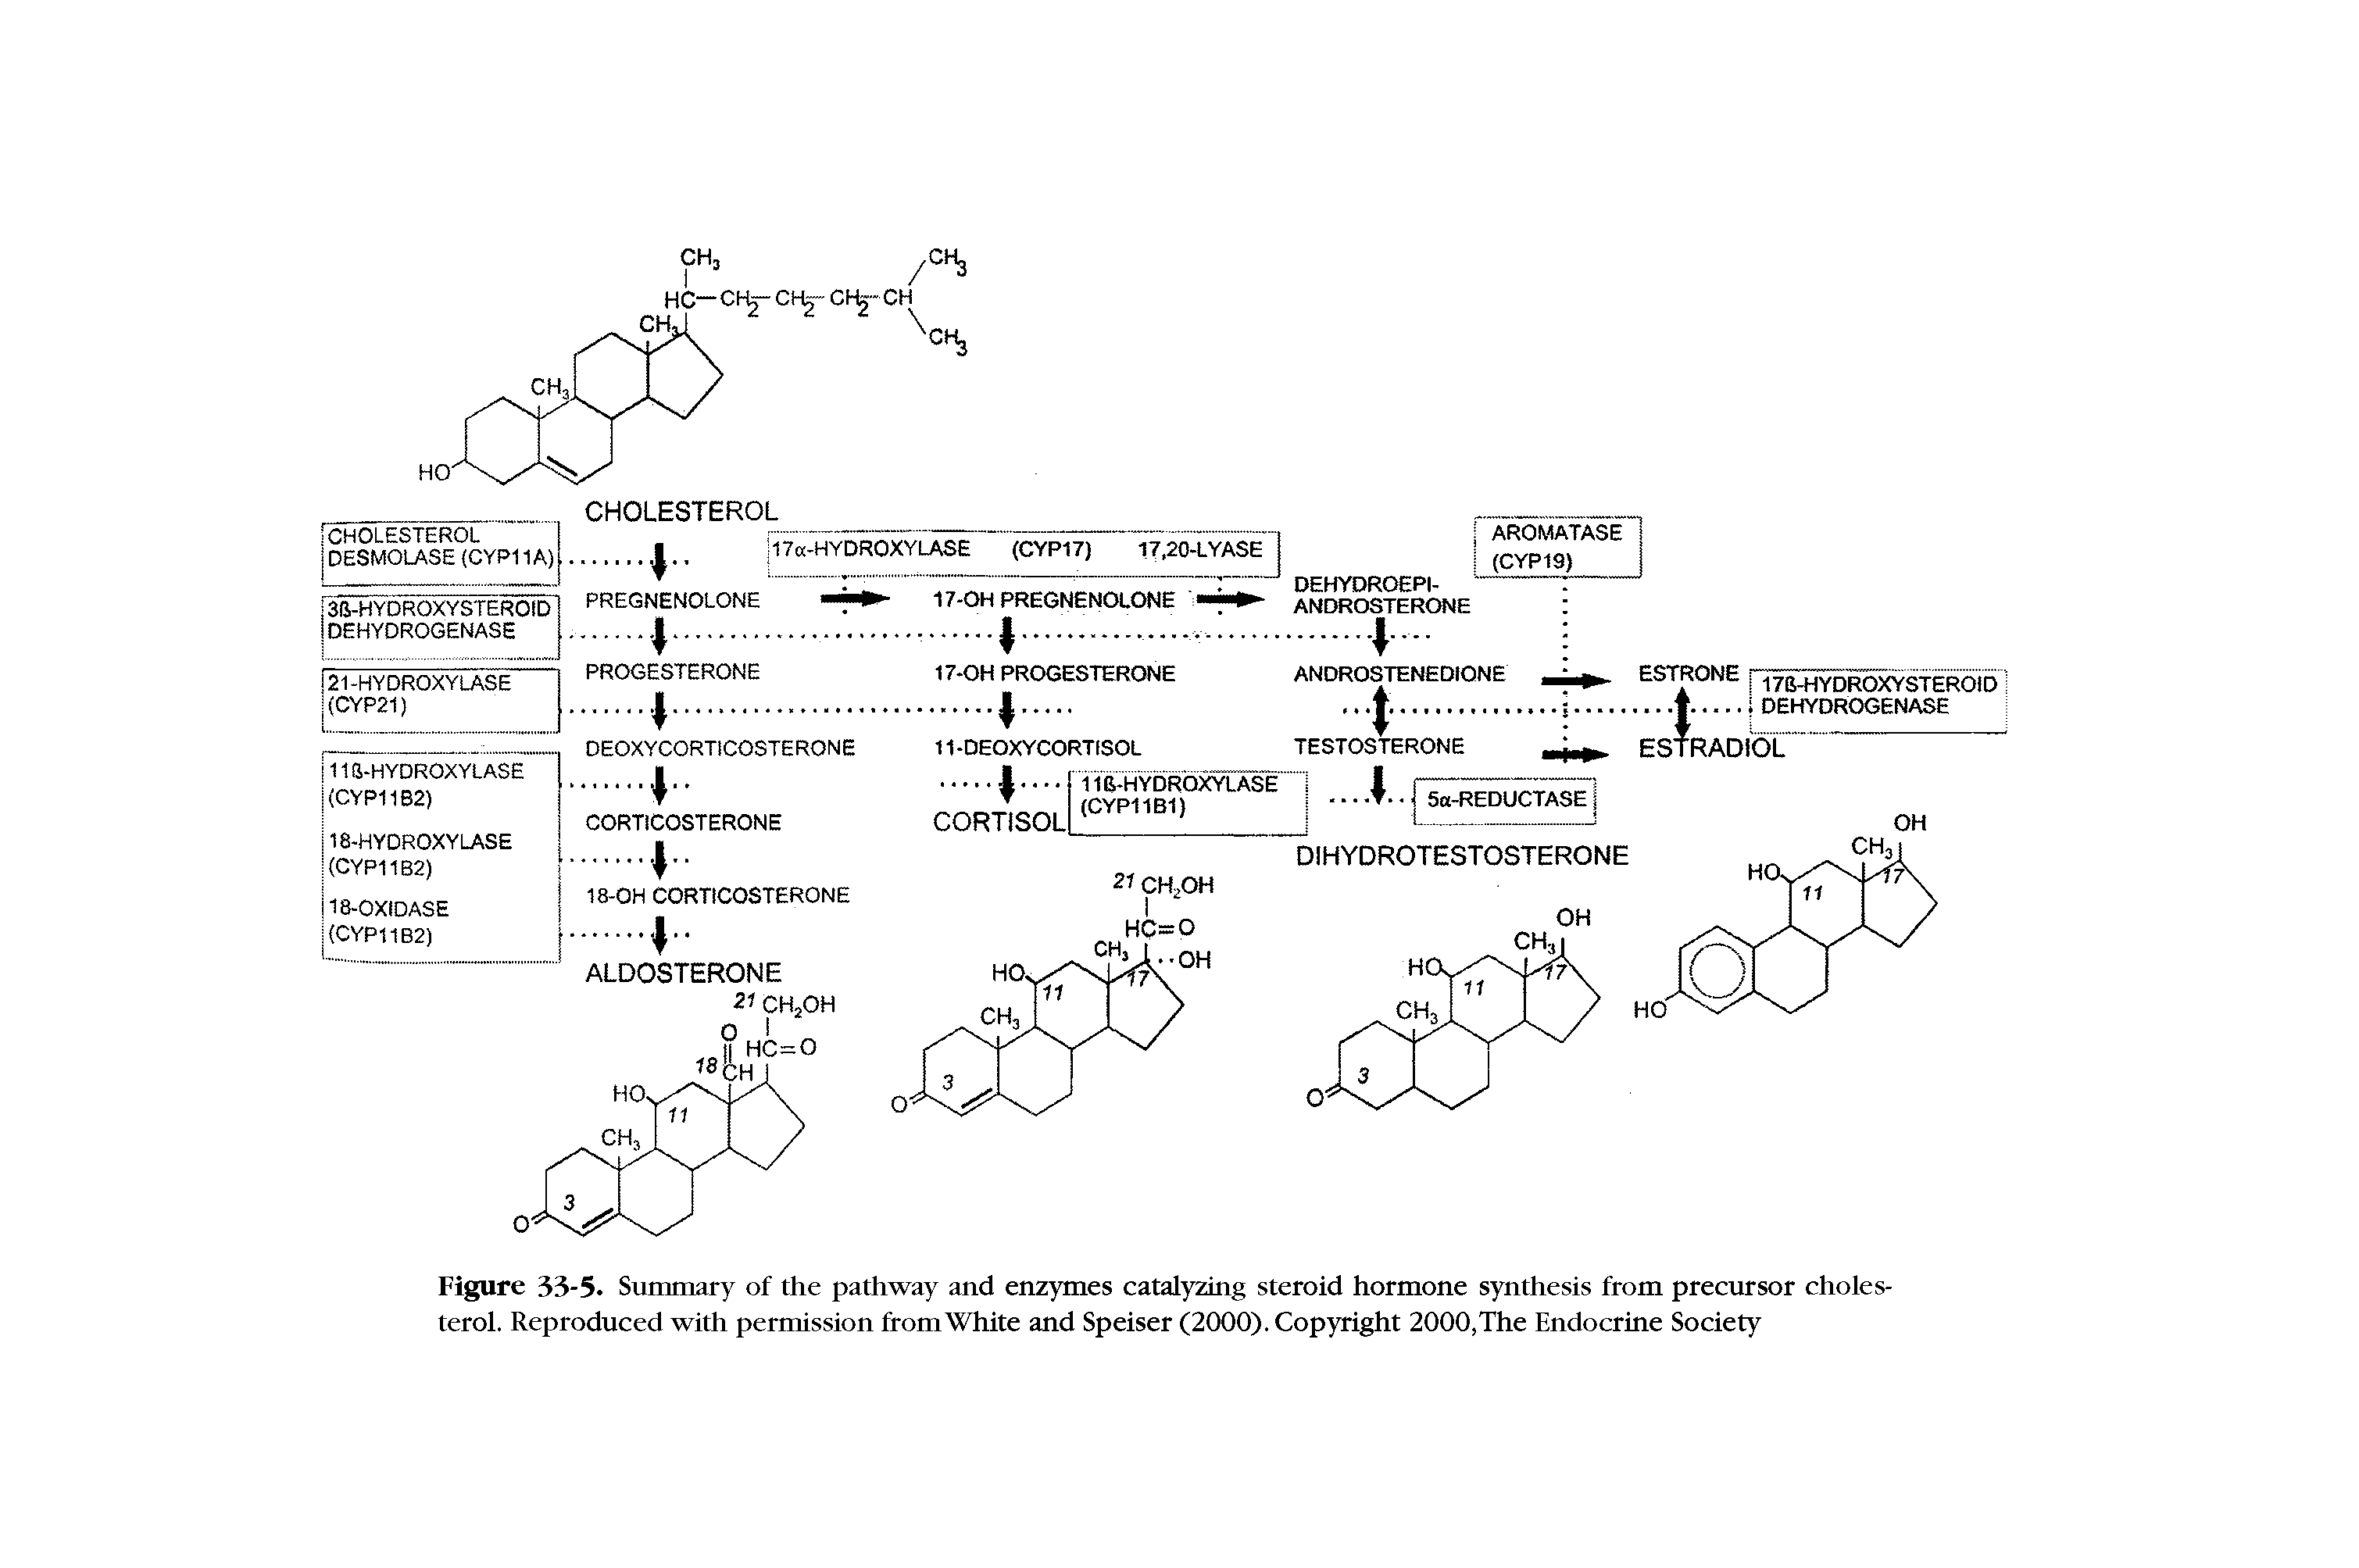 Figure 33-5. Summary of the pathway and enzymes catalyzing steroid hormone synthesis from precursor cholesterol. Reproduced with permission from White and Speiser (2000). Copyright 2000,The Endocrine Society...